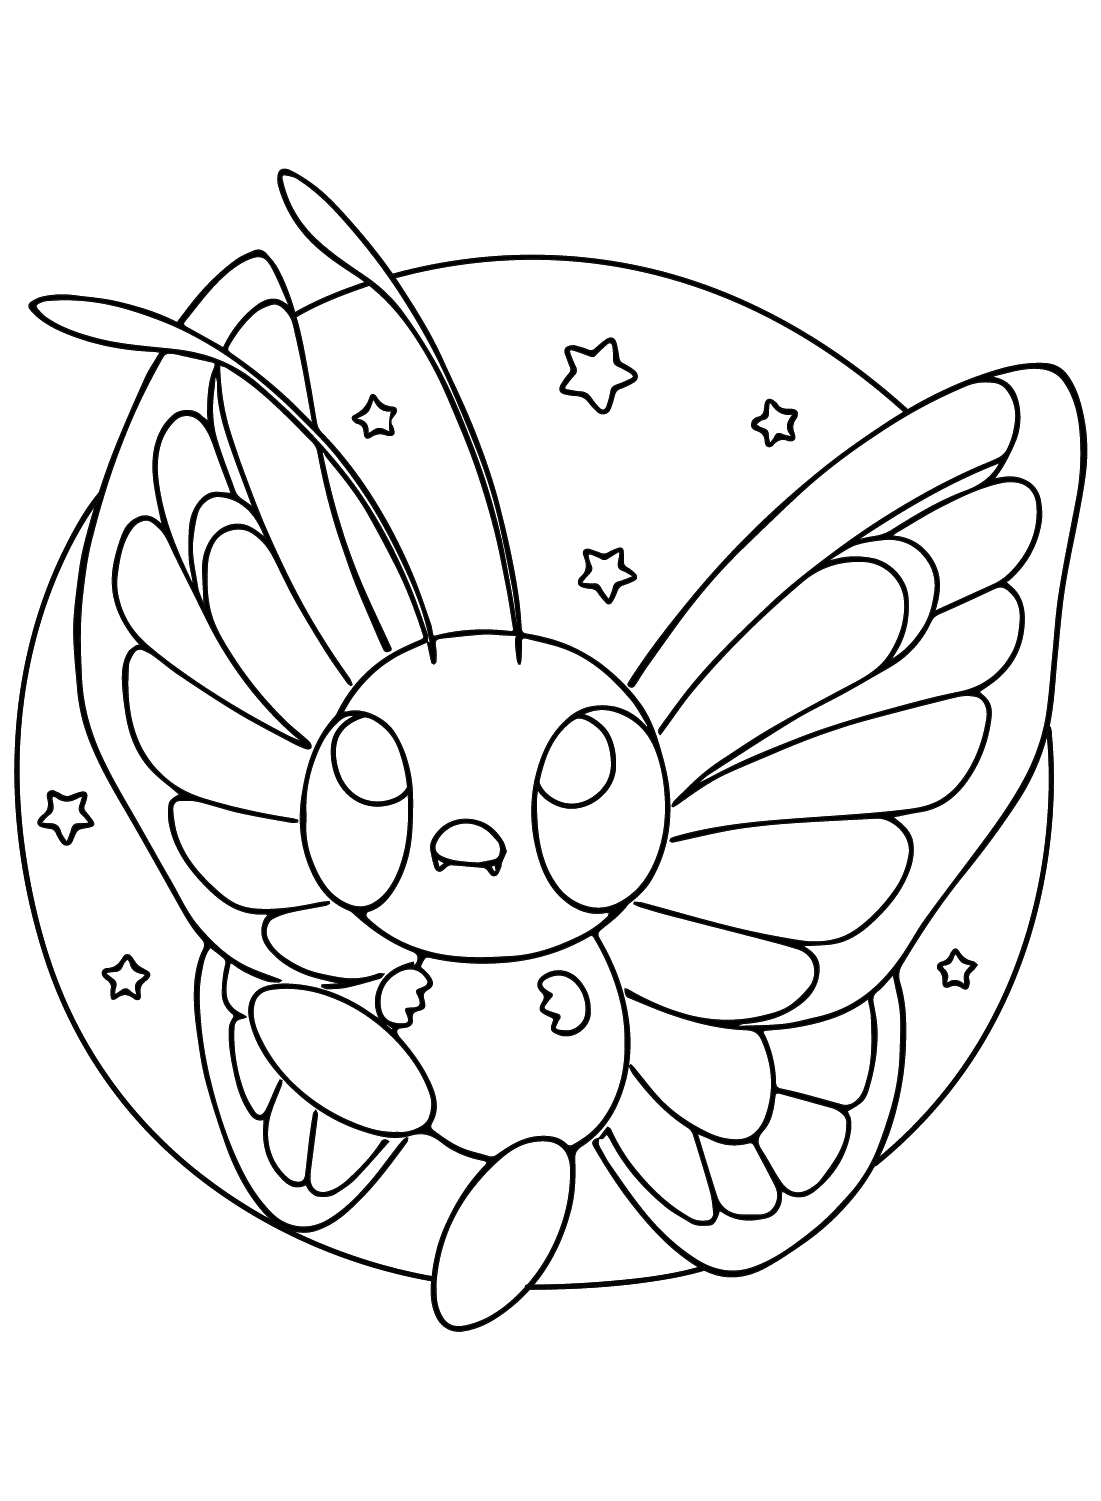 Butterfree Pokemon Picture to Color from Butterfree